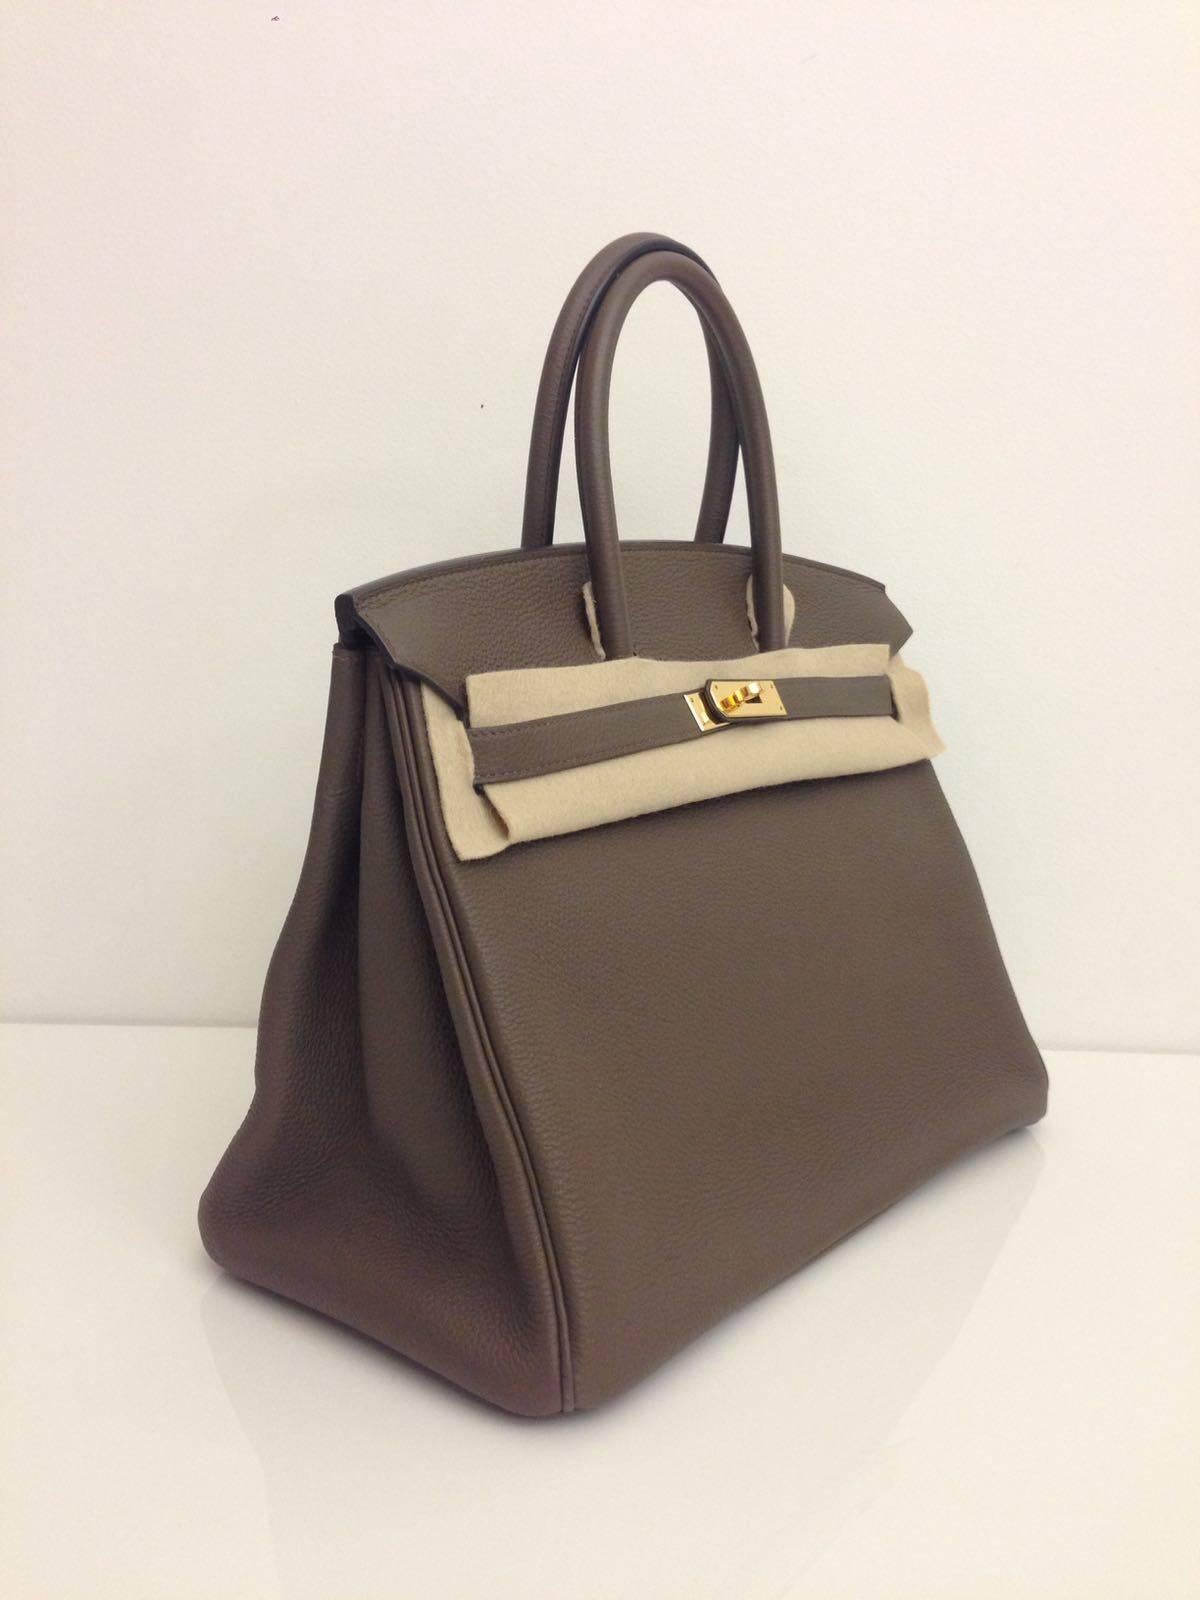 Hermes 
Birkin Size 35
Togo leather 
Colour Taupe
gold hardware 
store fresh, comes with receipt and full set (dust bag, box...) 
Hydeparkfashion specializes in sourcing and delivering authentic luxury handbags, mainly Hermes, to client around